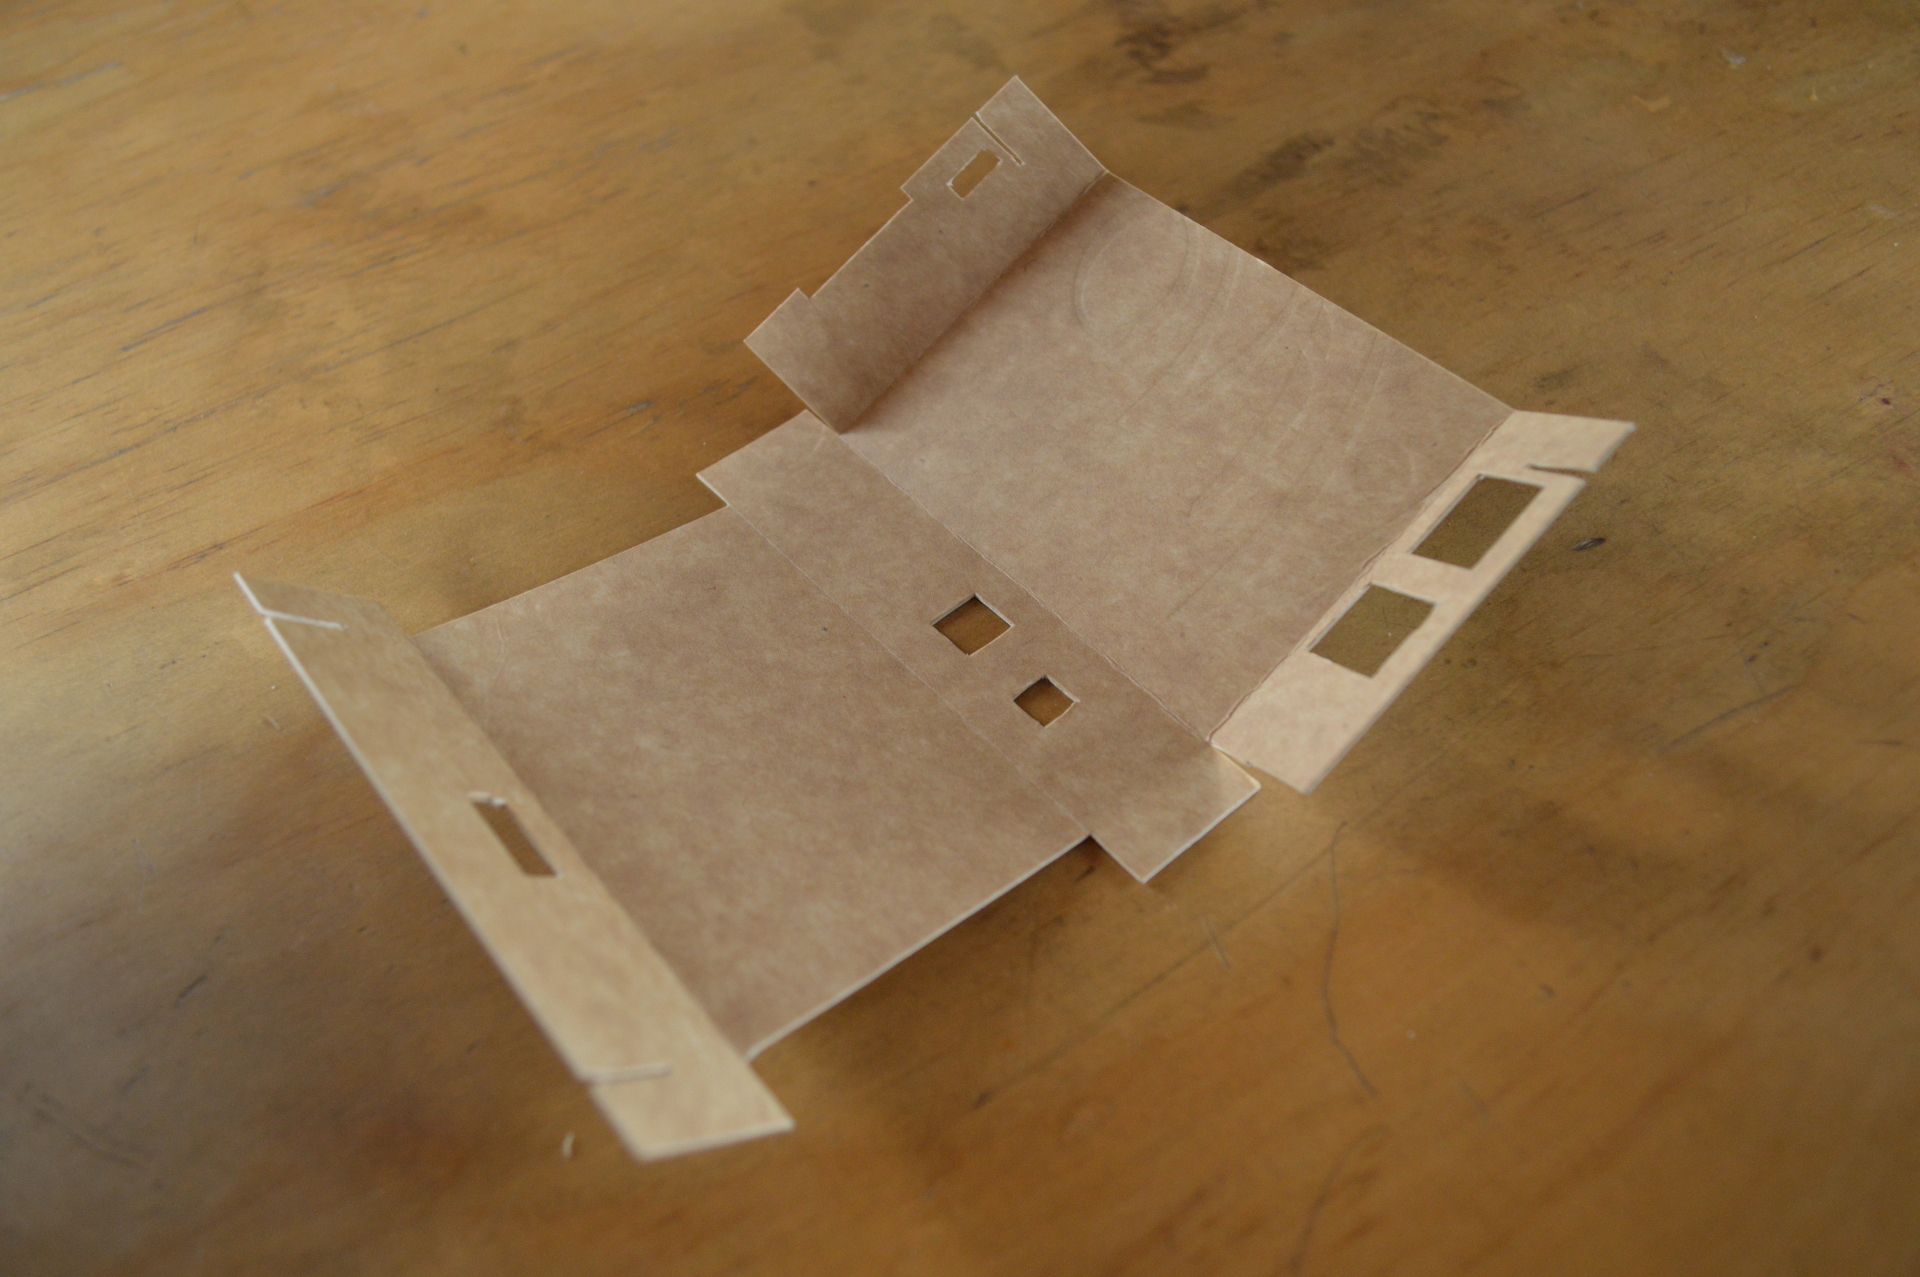 Image of the unfolded box